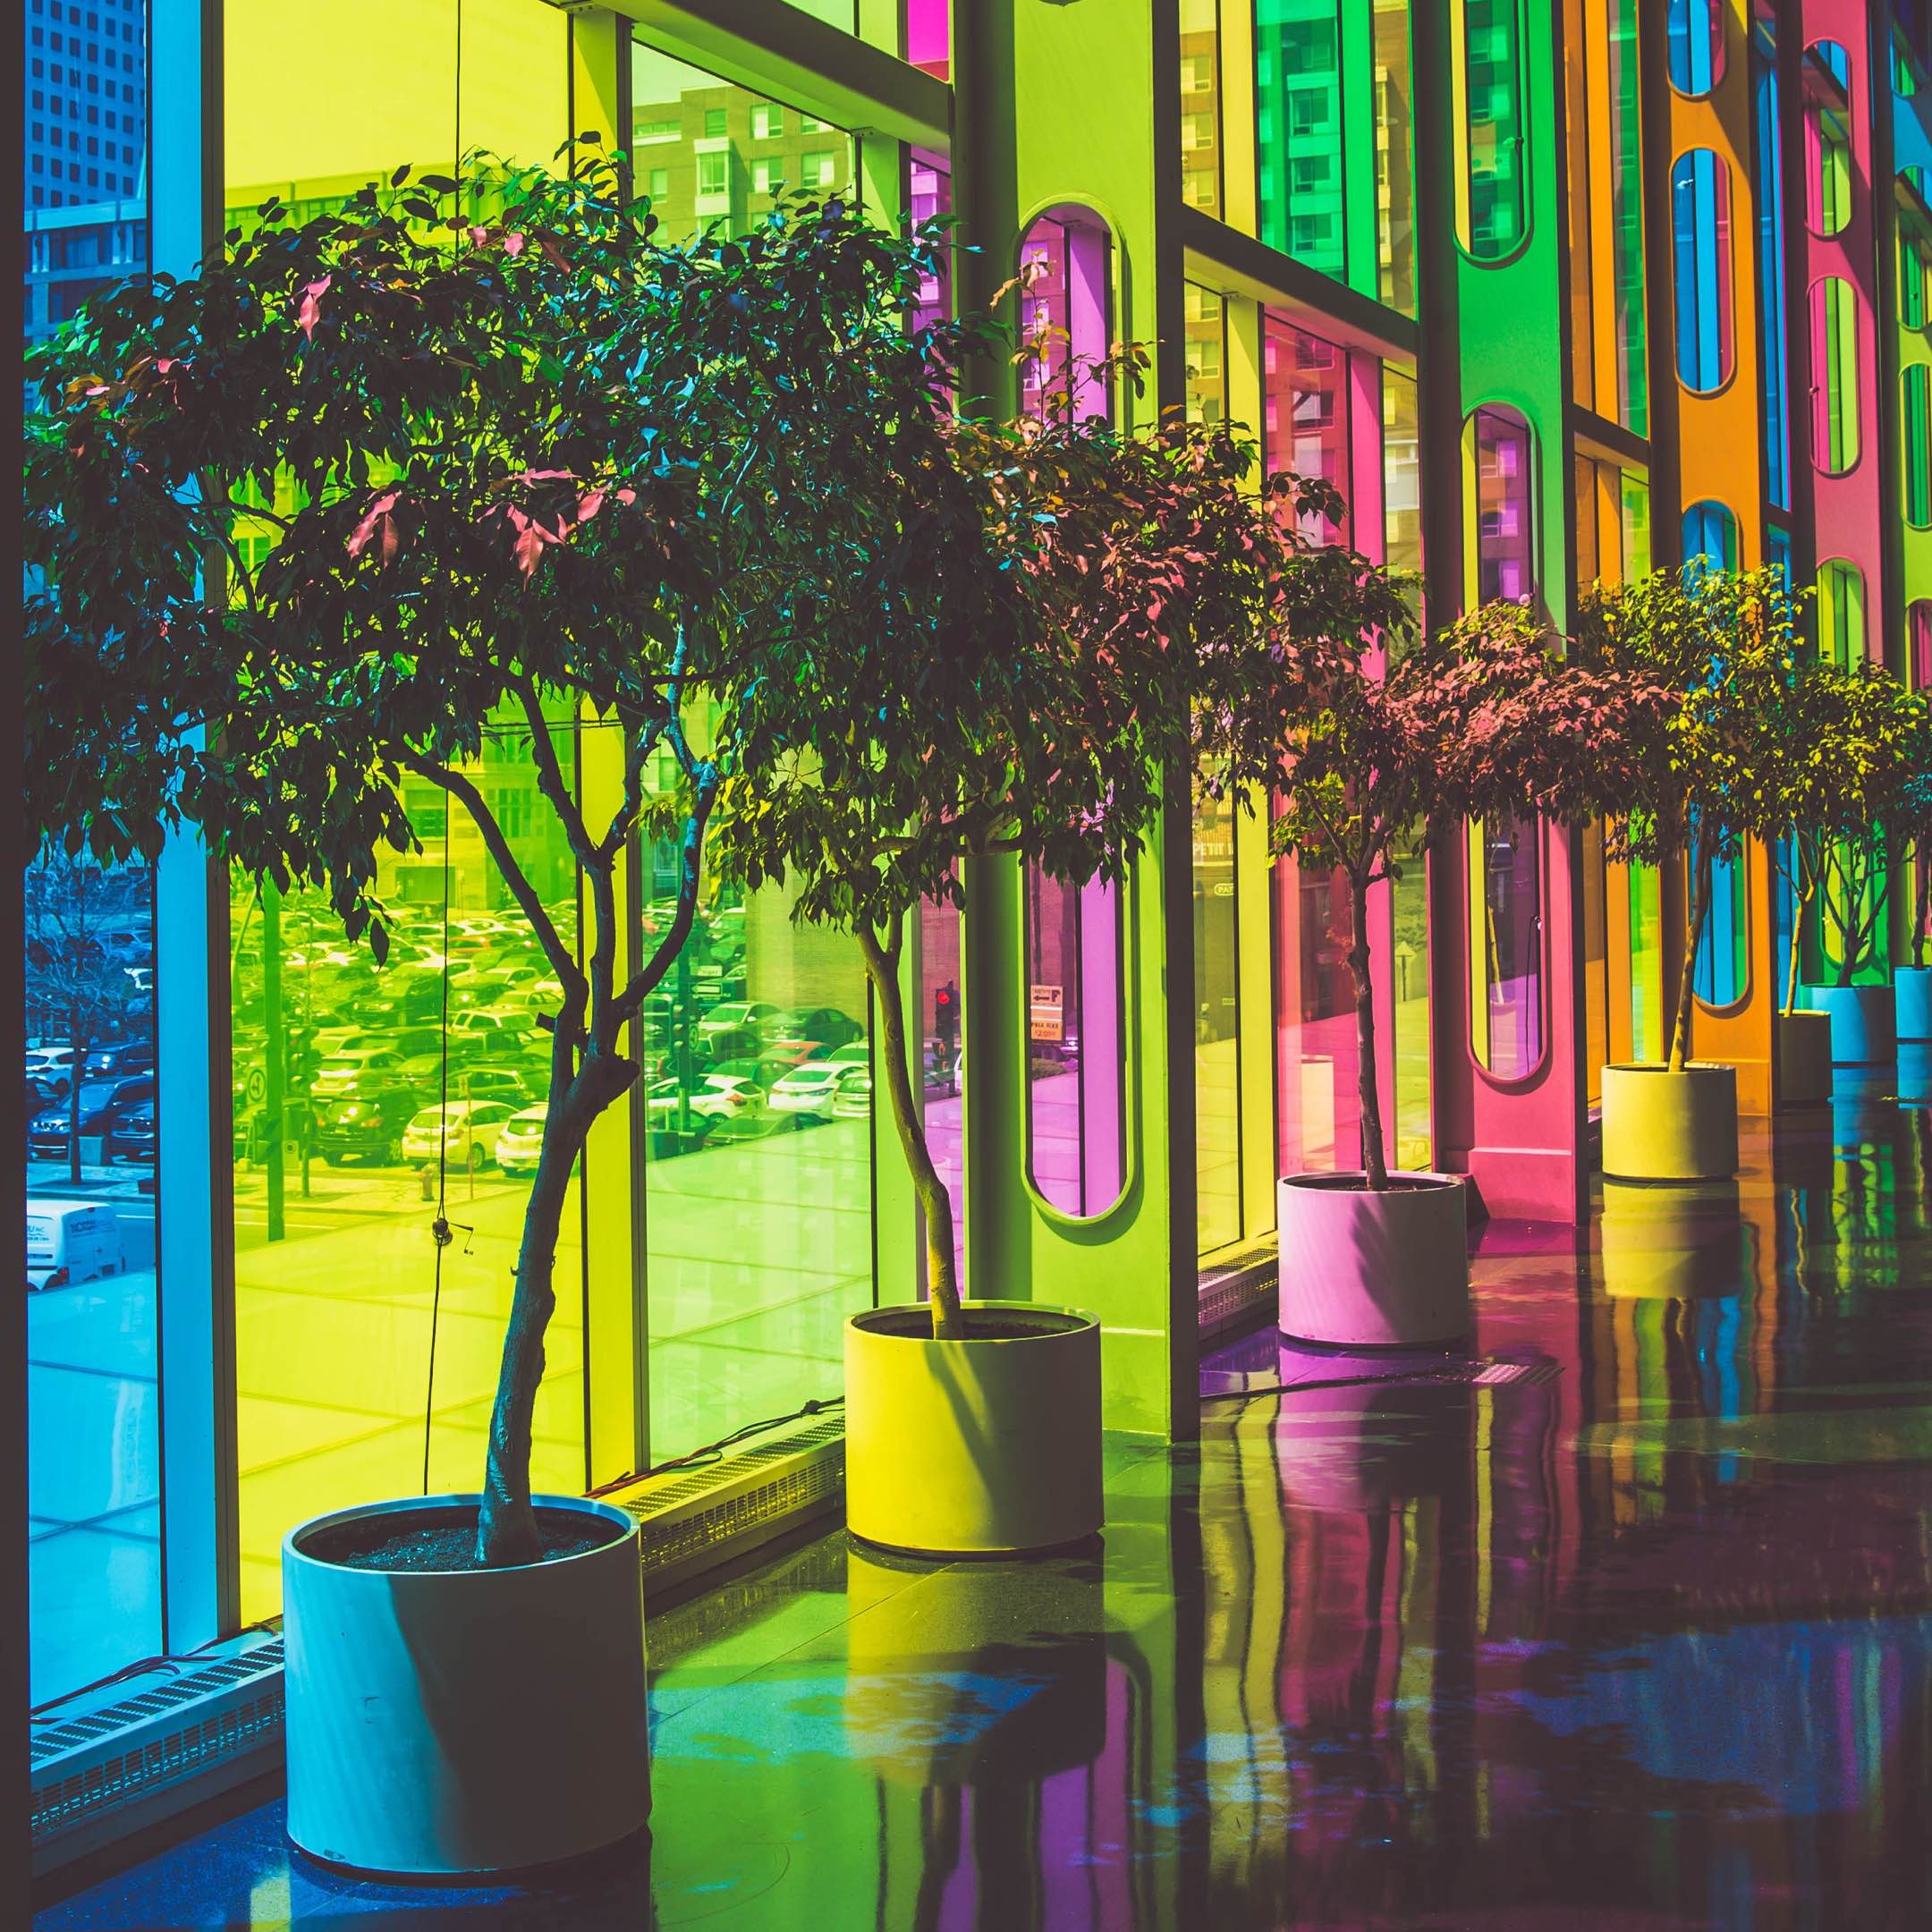 Neon tinted windows casting a colorful glow on large potted trees